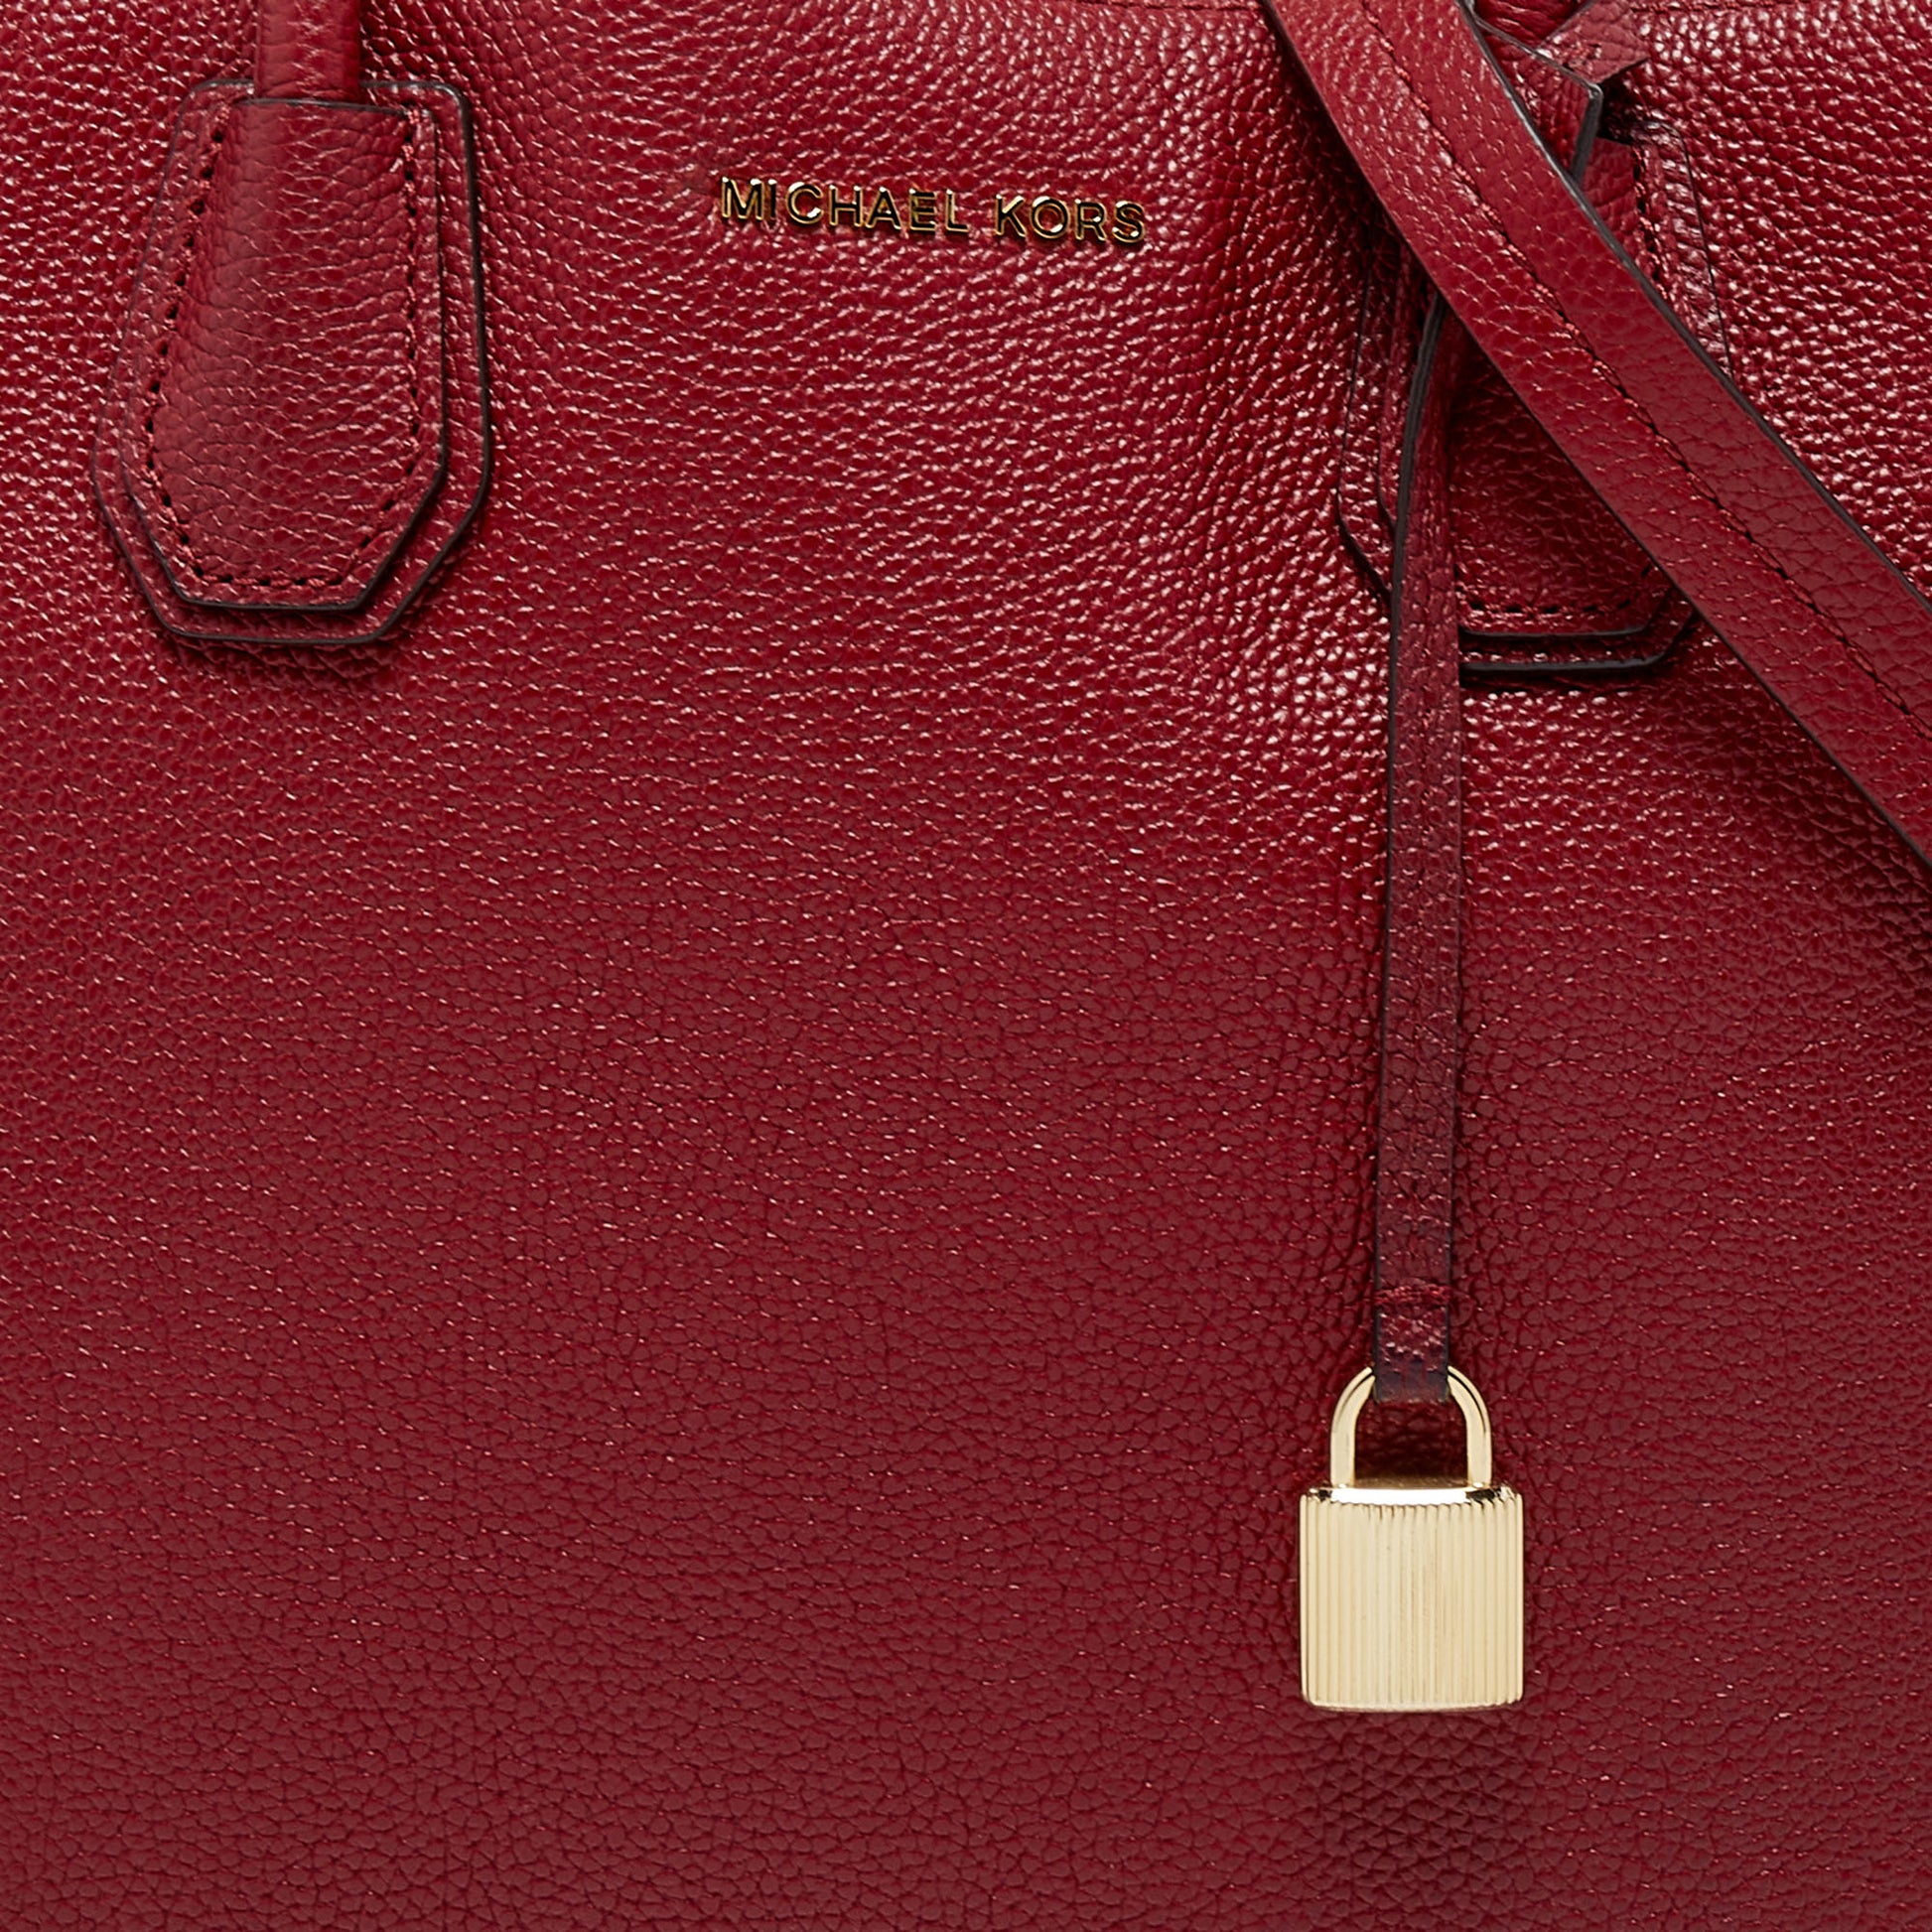 Michael Kors Red Grained Leather Large Mercer Tote Michael Kors